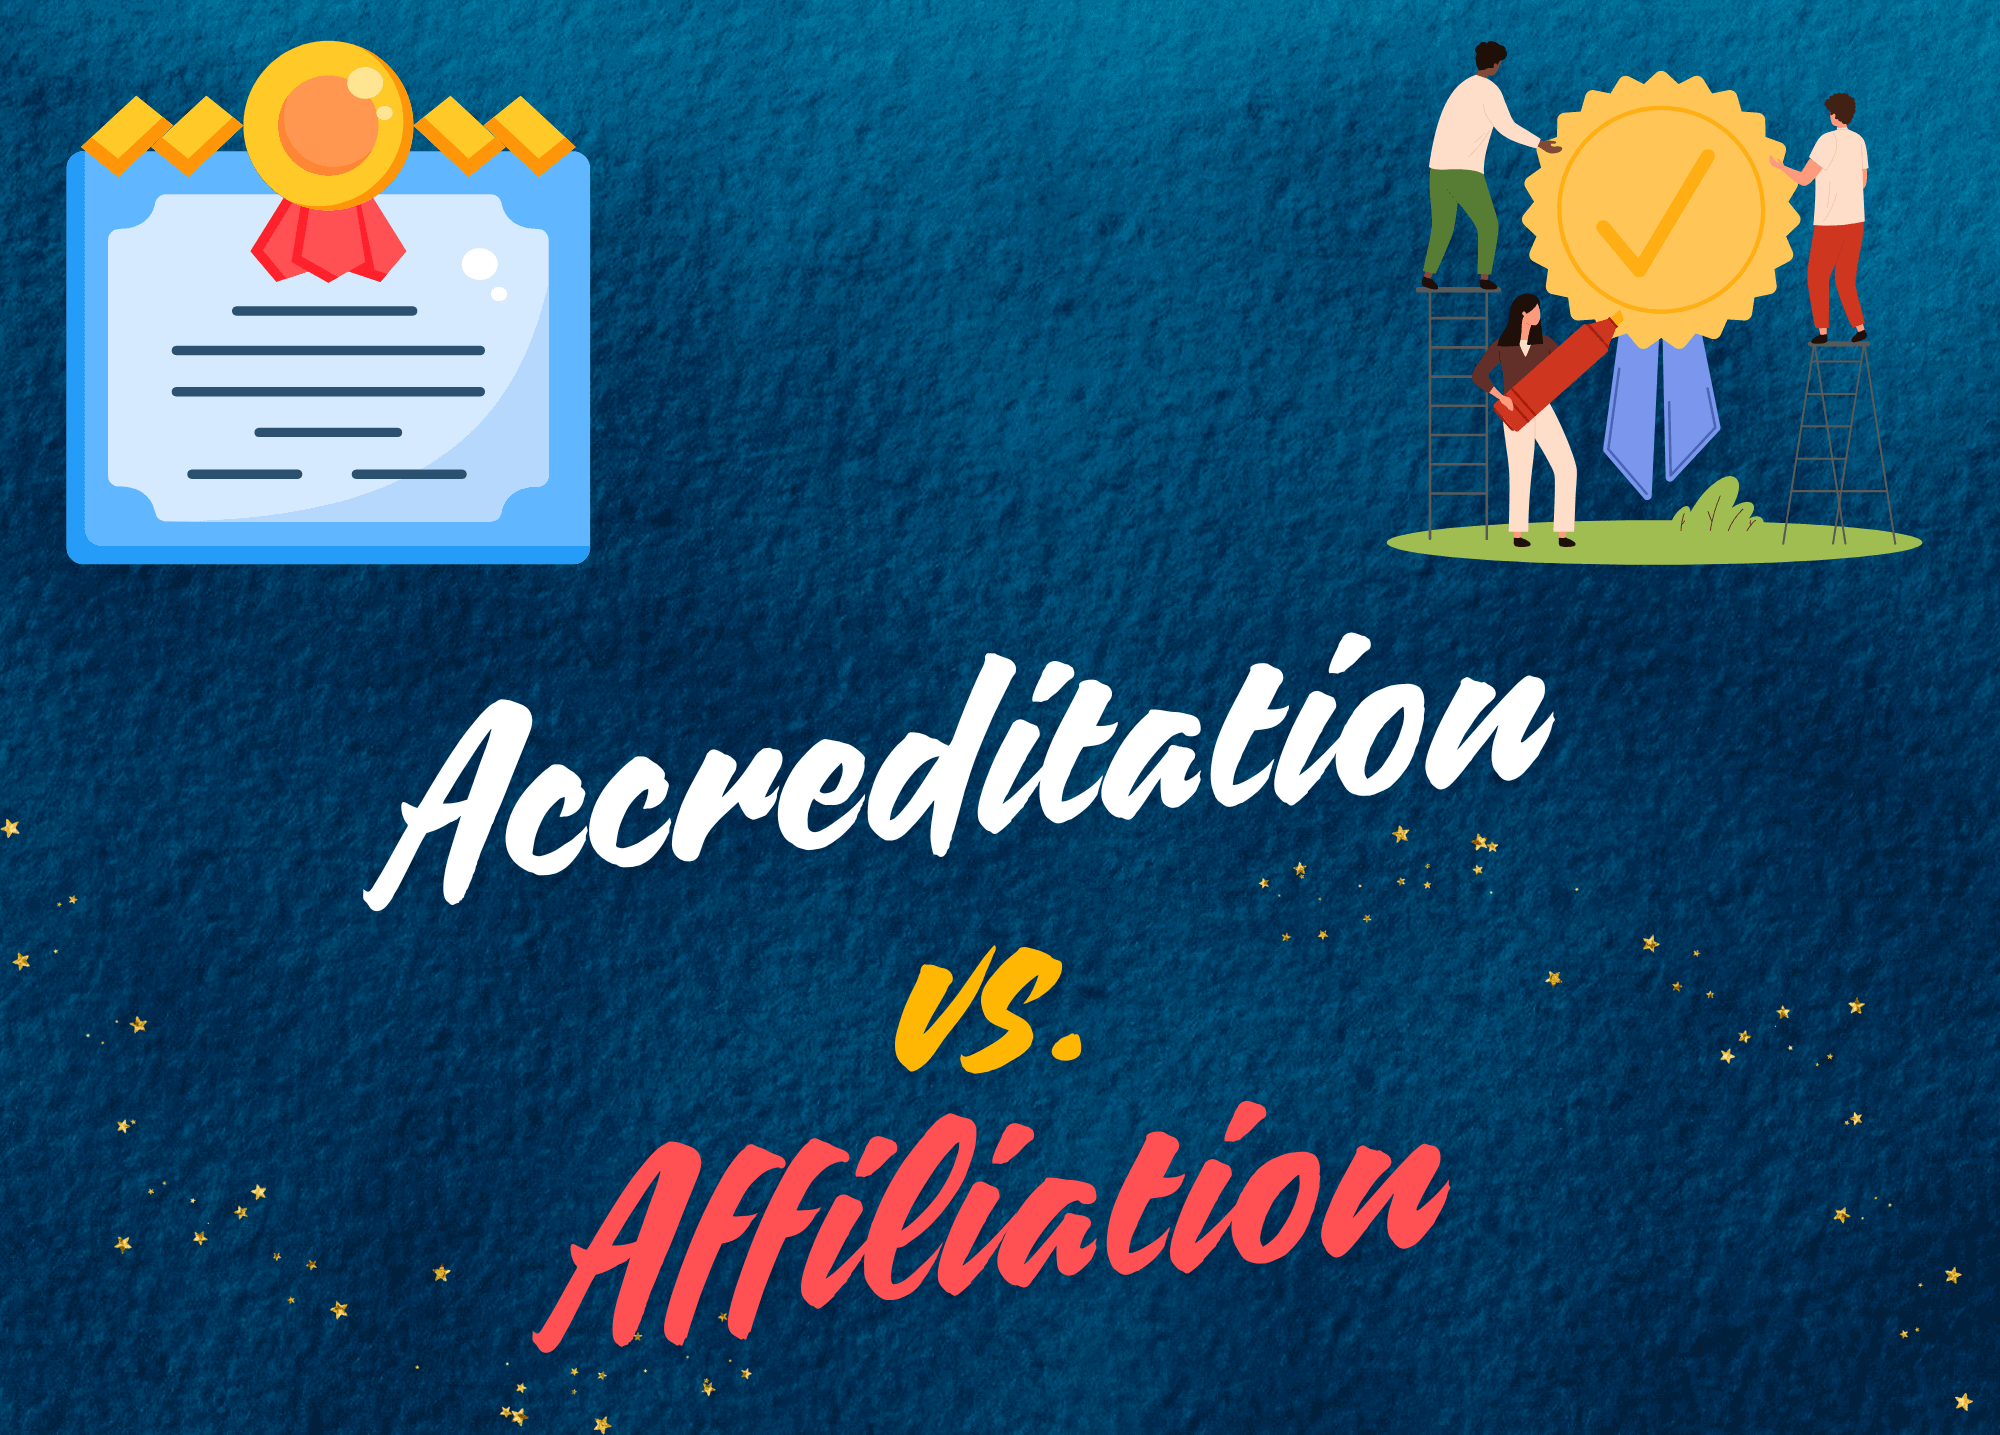 Accreditation vs. Affiliation A Clearer Look